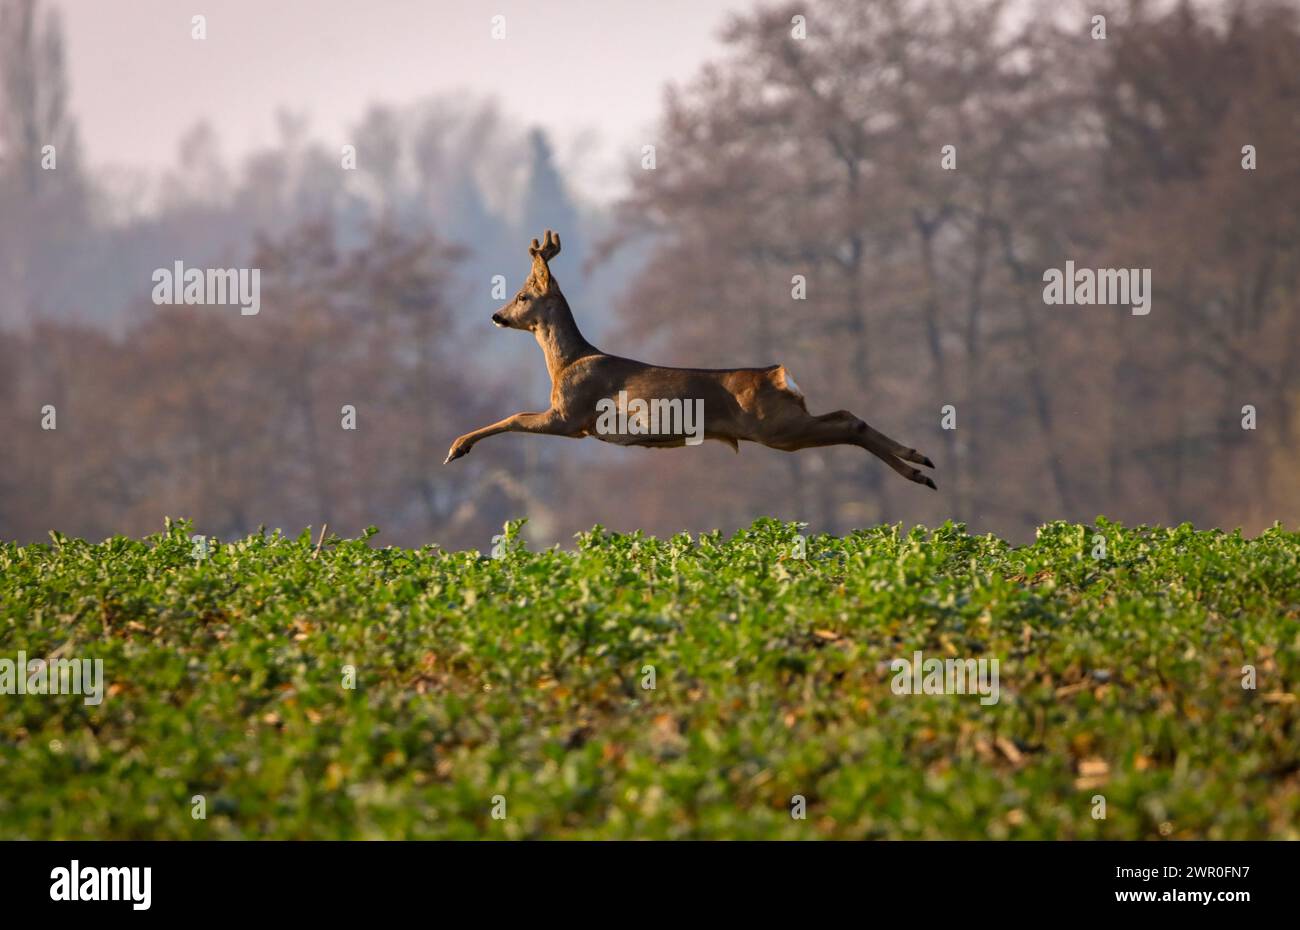 deer jumping and running over field Stock Photo